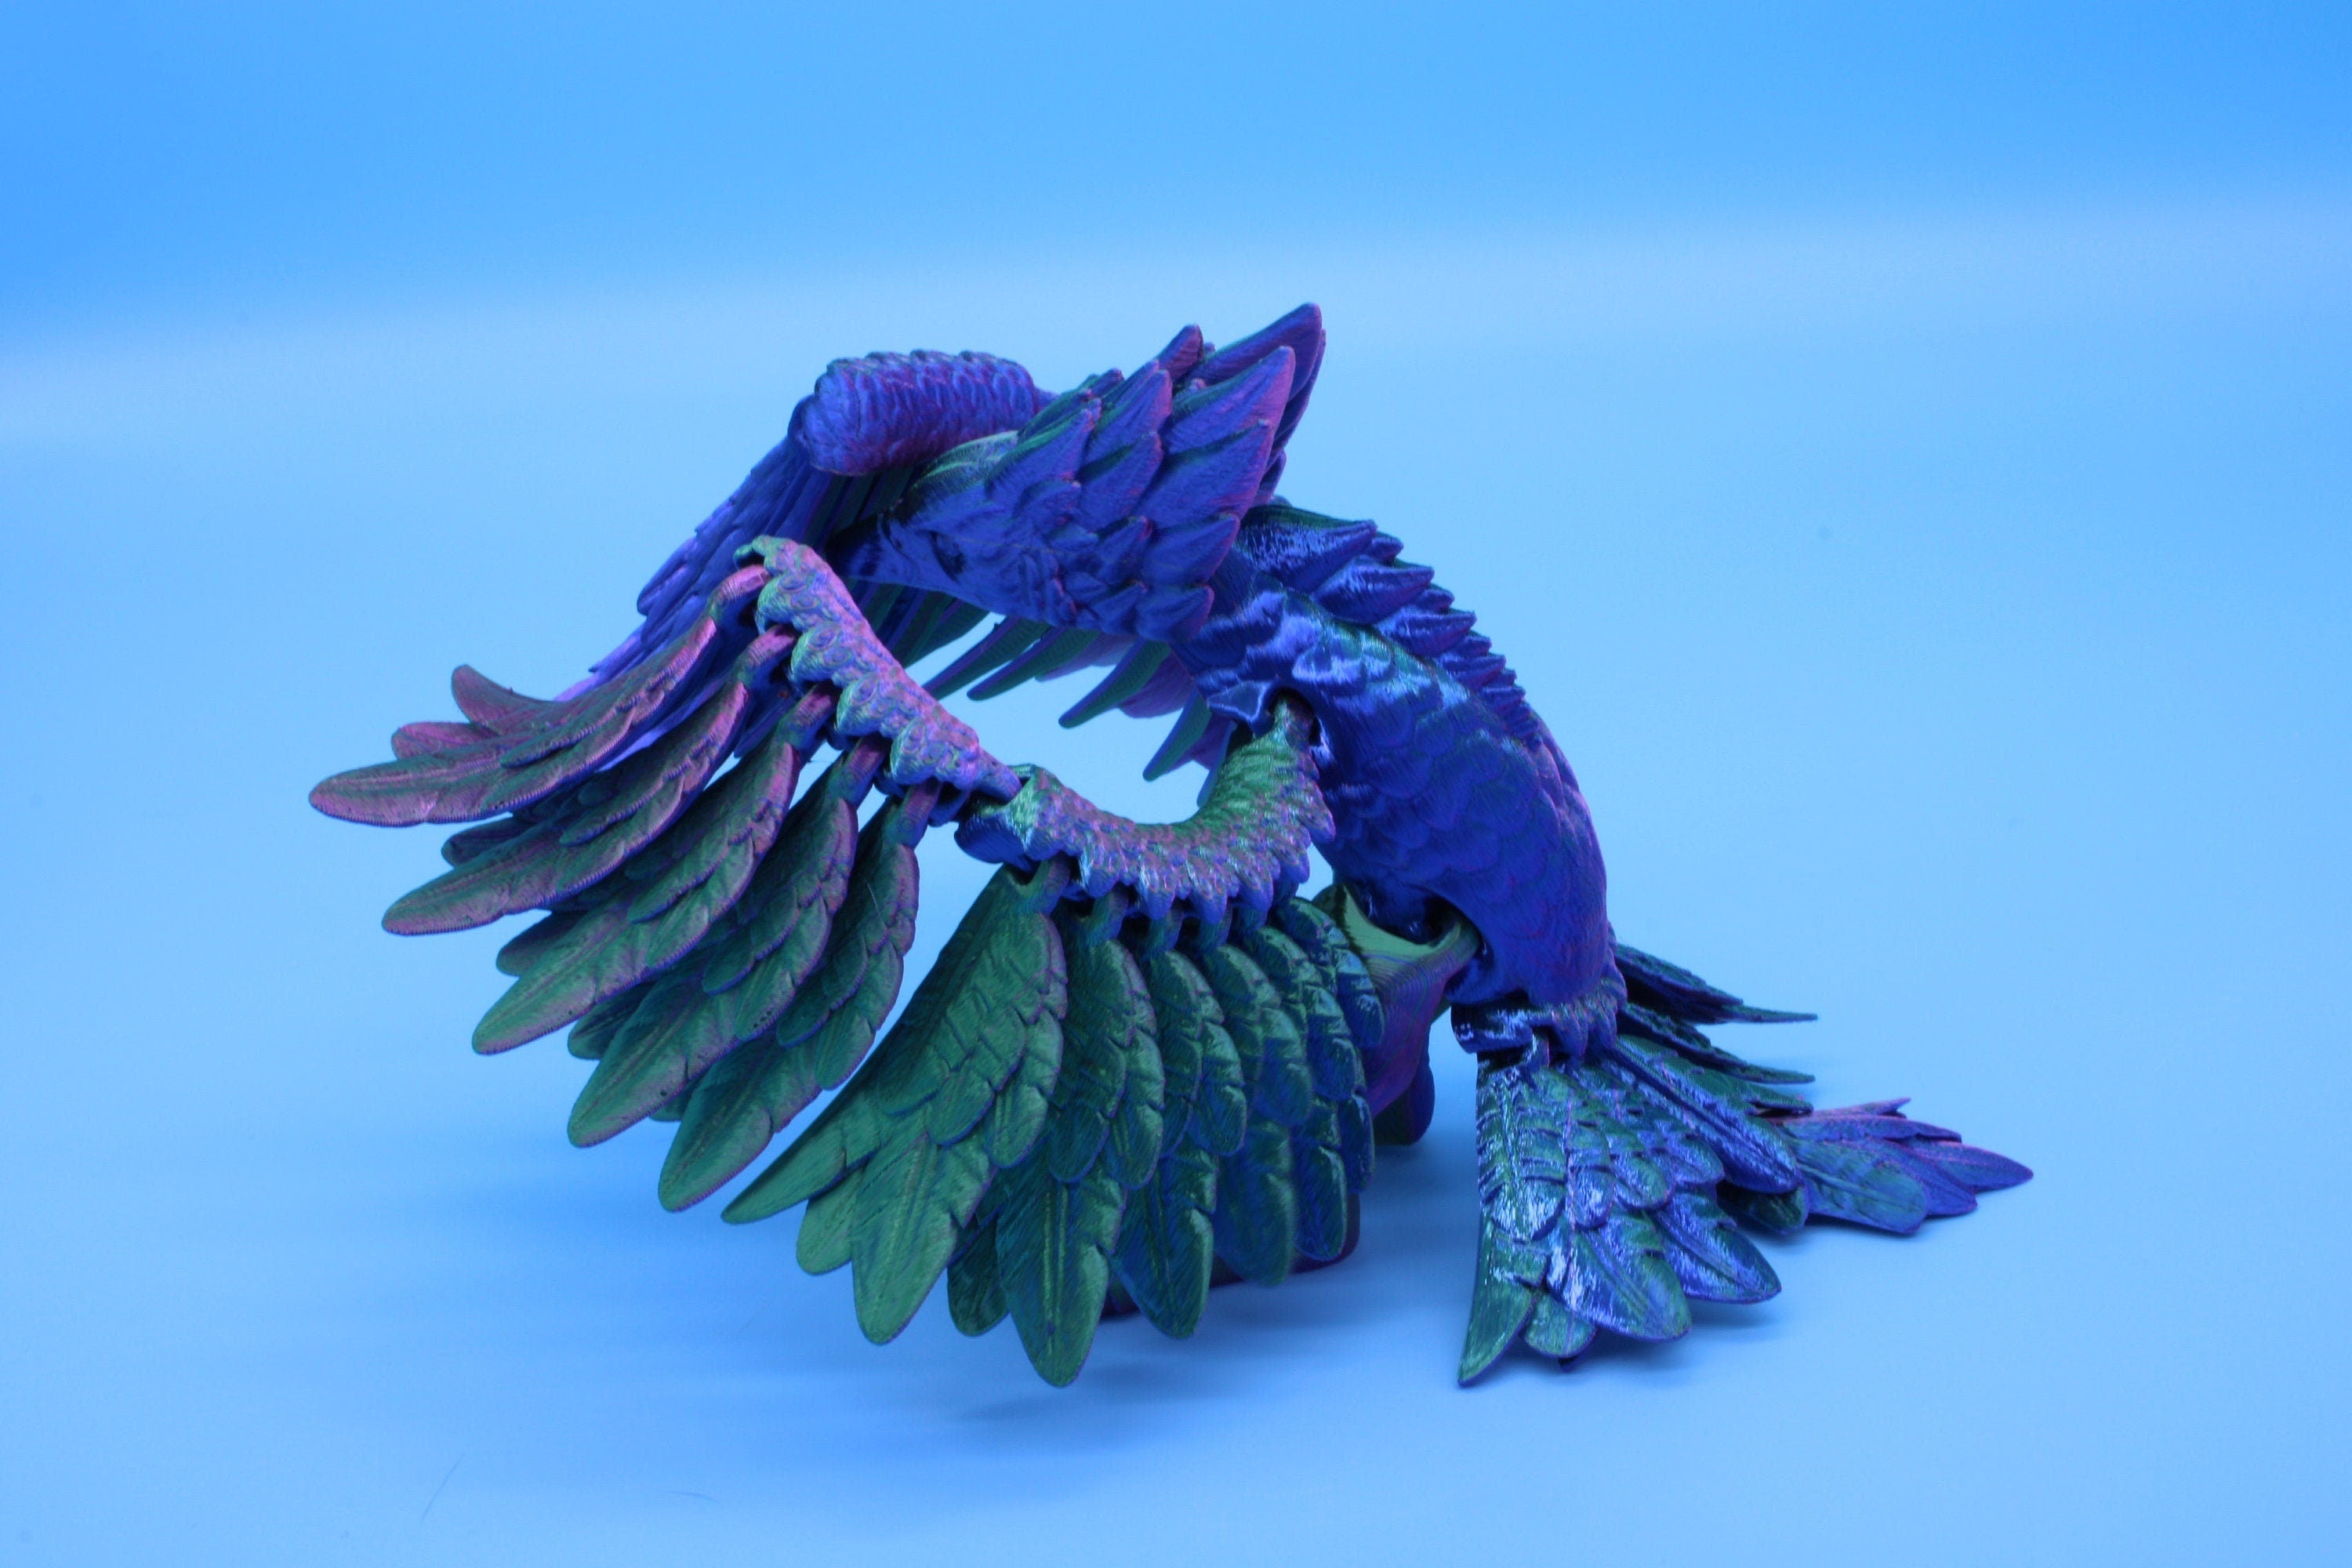 Cute Flexi Multi Color Phoenix. Unique 3D printed. Great Articulating fidget toy, desk, sensory toy. 4 inch Blue, Red, Teal, Green.